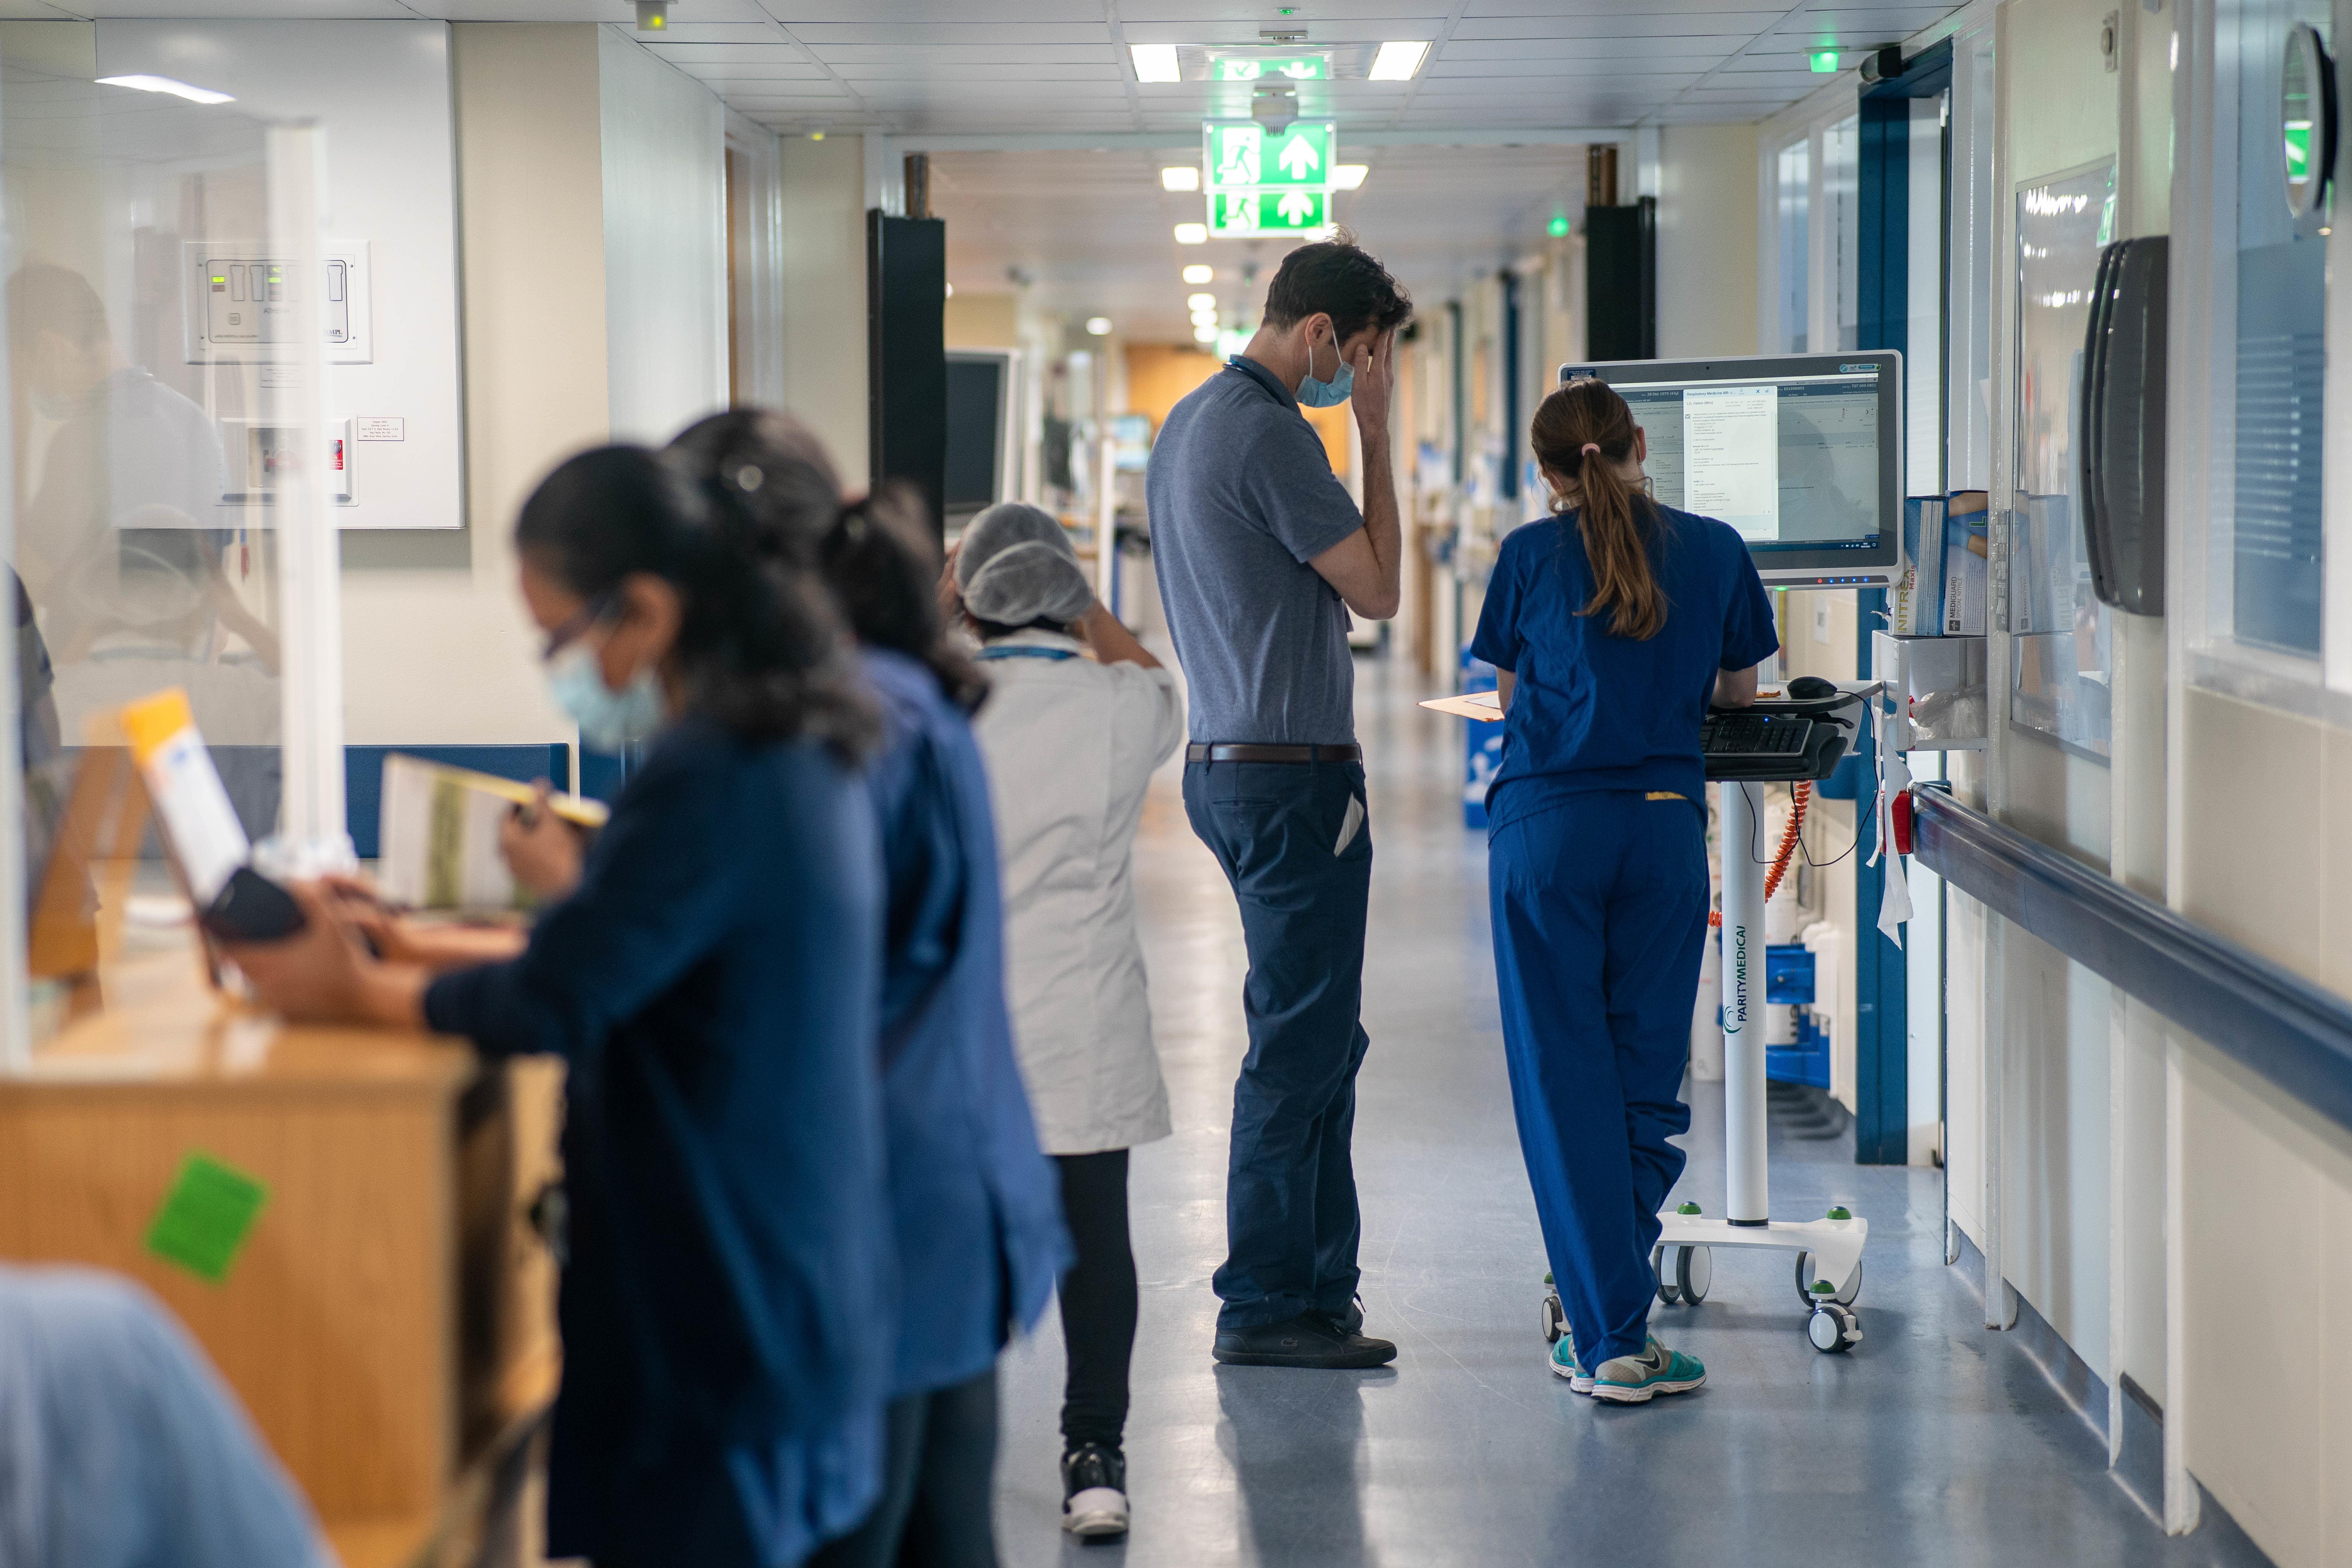 Junior doctors say they are overworked and underpaid